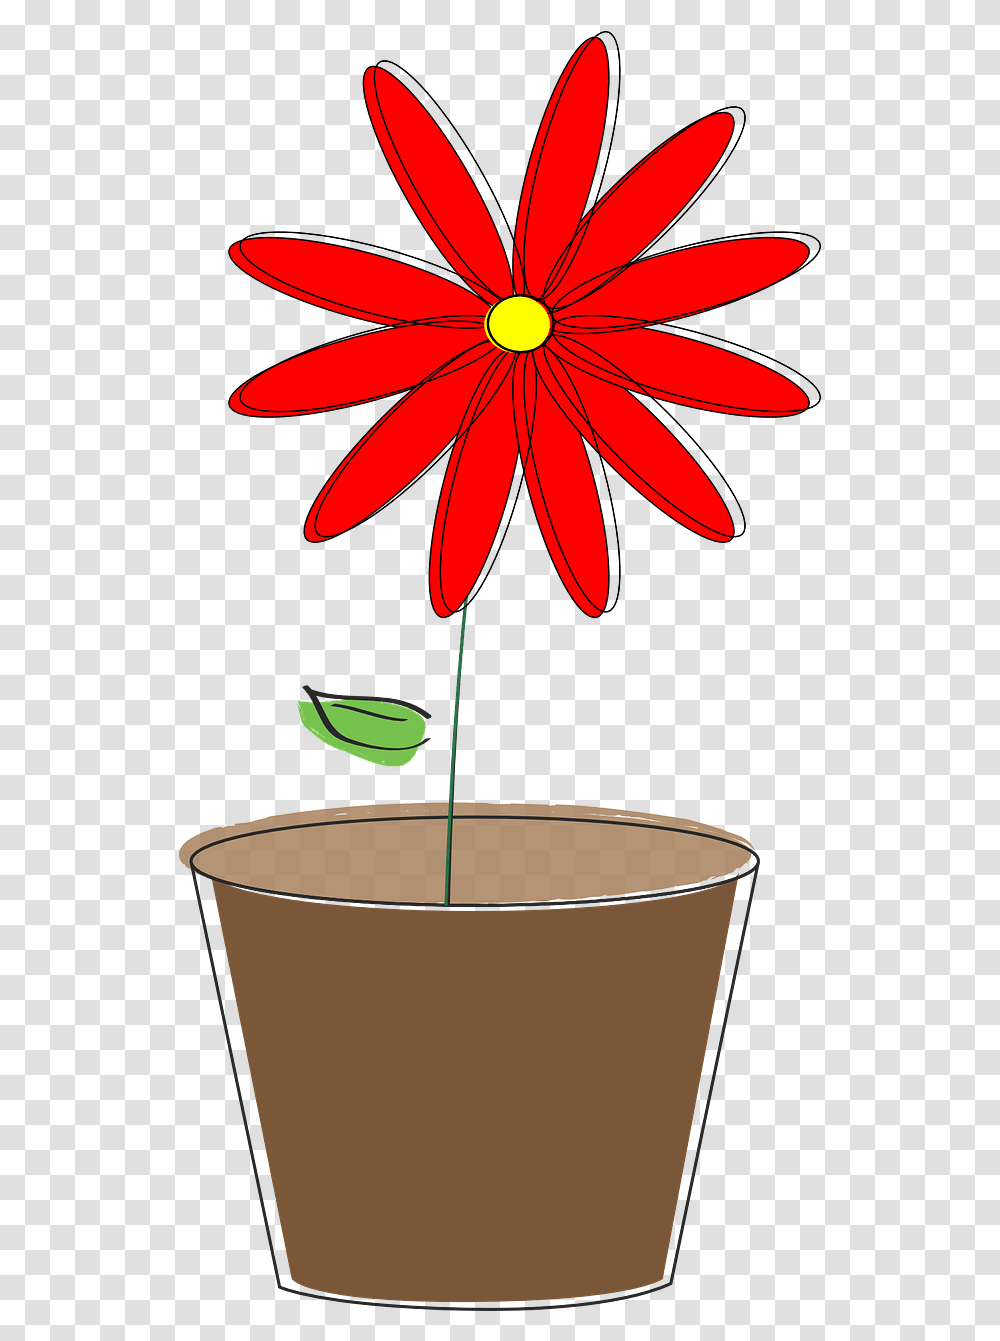 Potted Flowers Potted Plant Flower Daisy Spring Paper Flower Center Template, Leaf, Daisies, Blossom, Photography Transparent Png